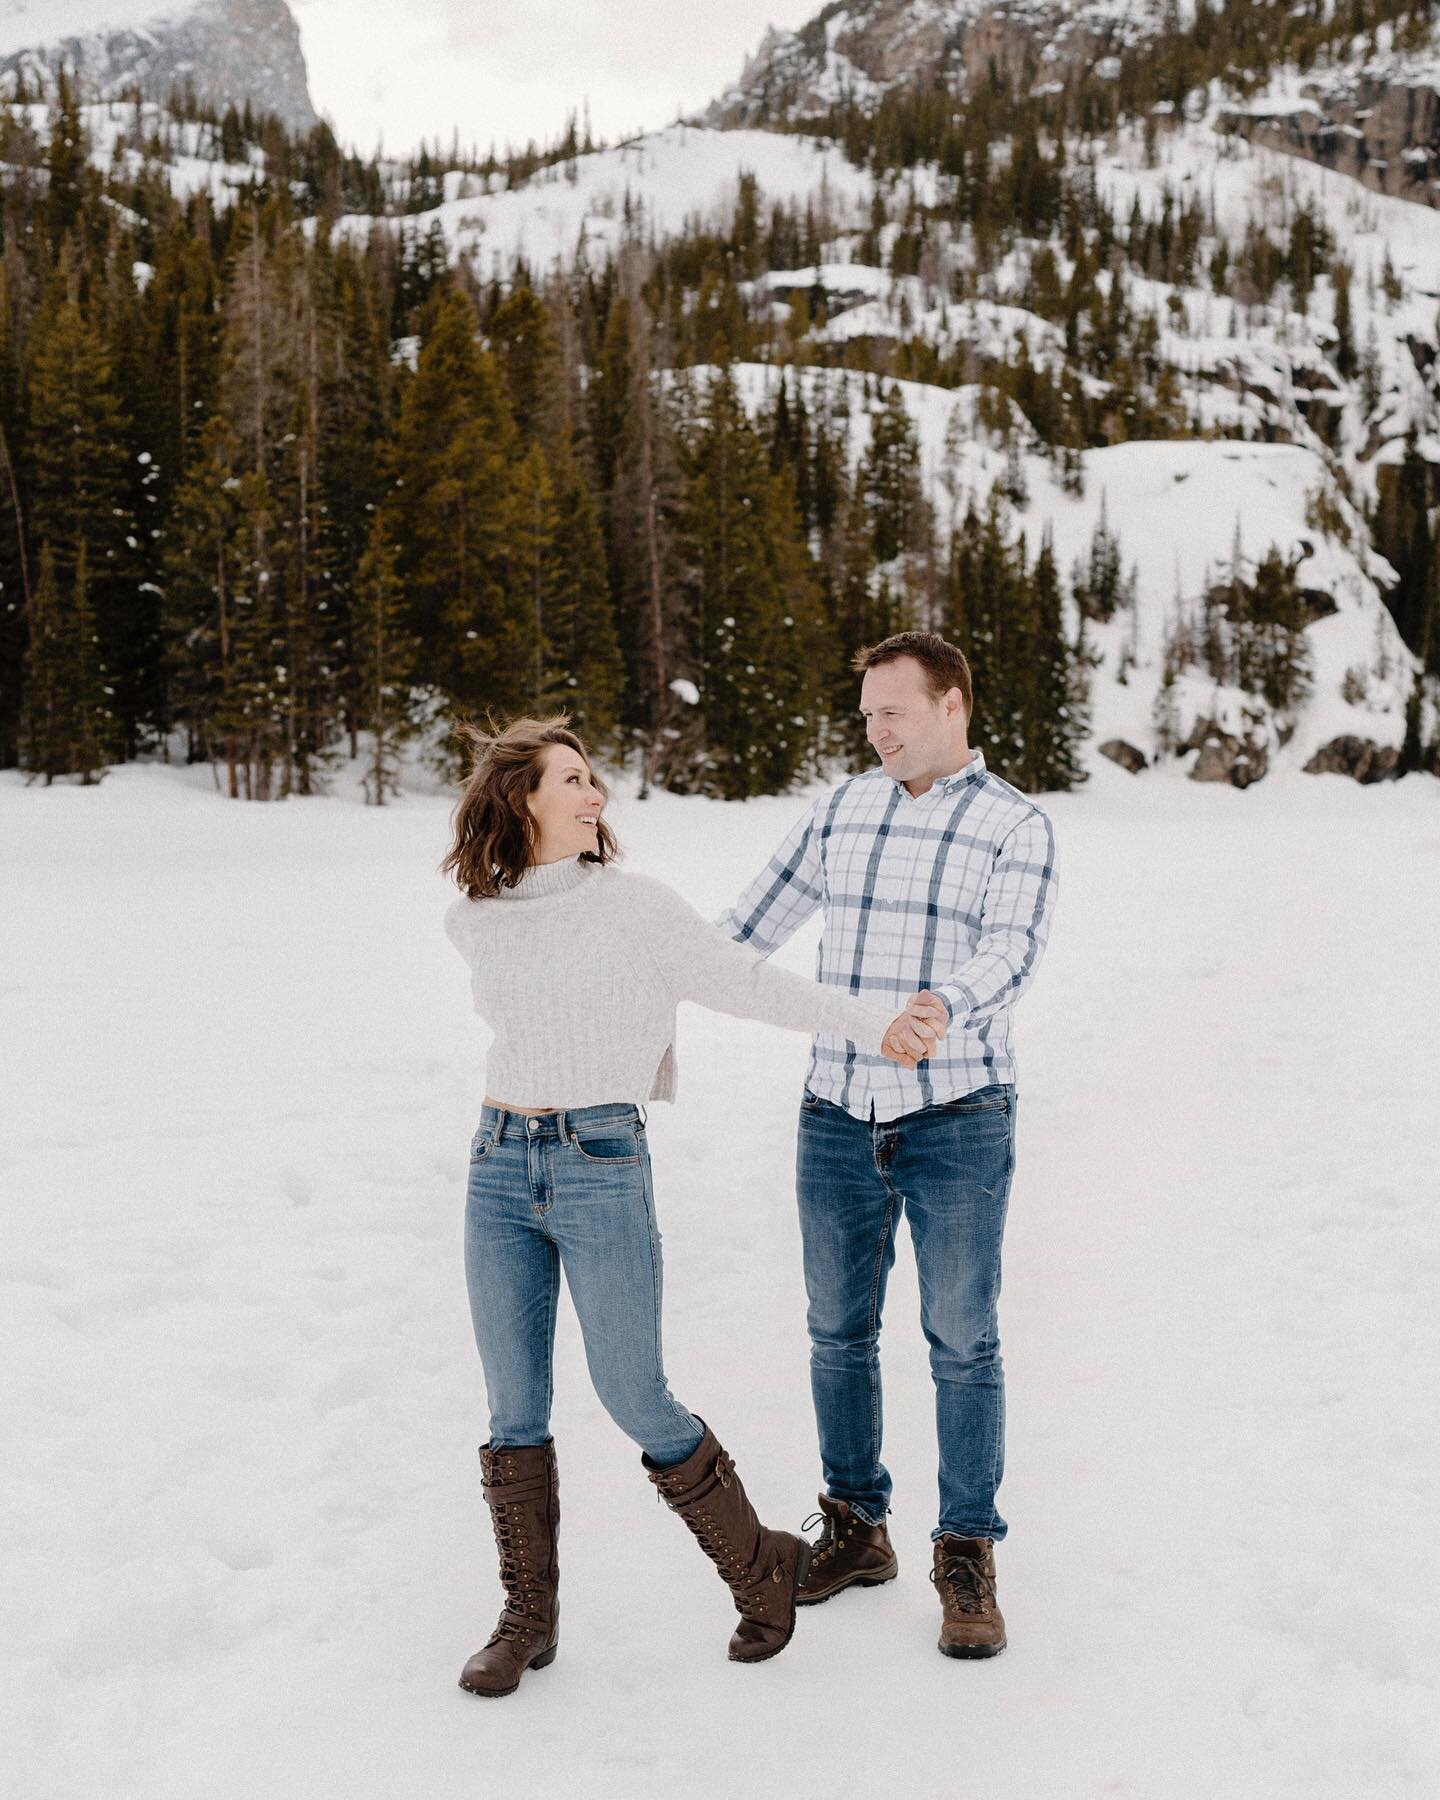 Colorado is seriously one of the coolest places in the world! We were both so stoked that we had the opportunity to travel there and photograph these two special humans celebrating their recent engagement! 
.
.
.
.
#coloradogram #coloradophotography 